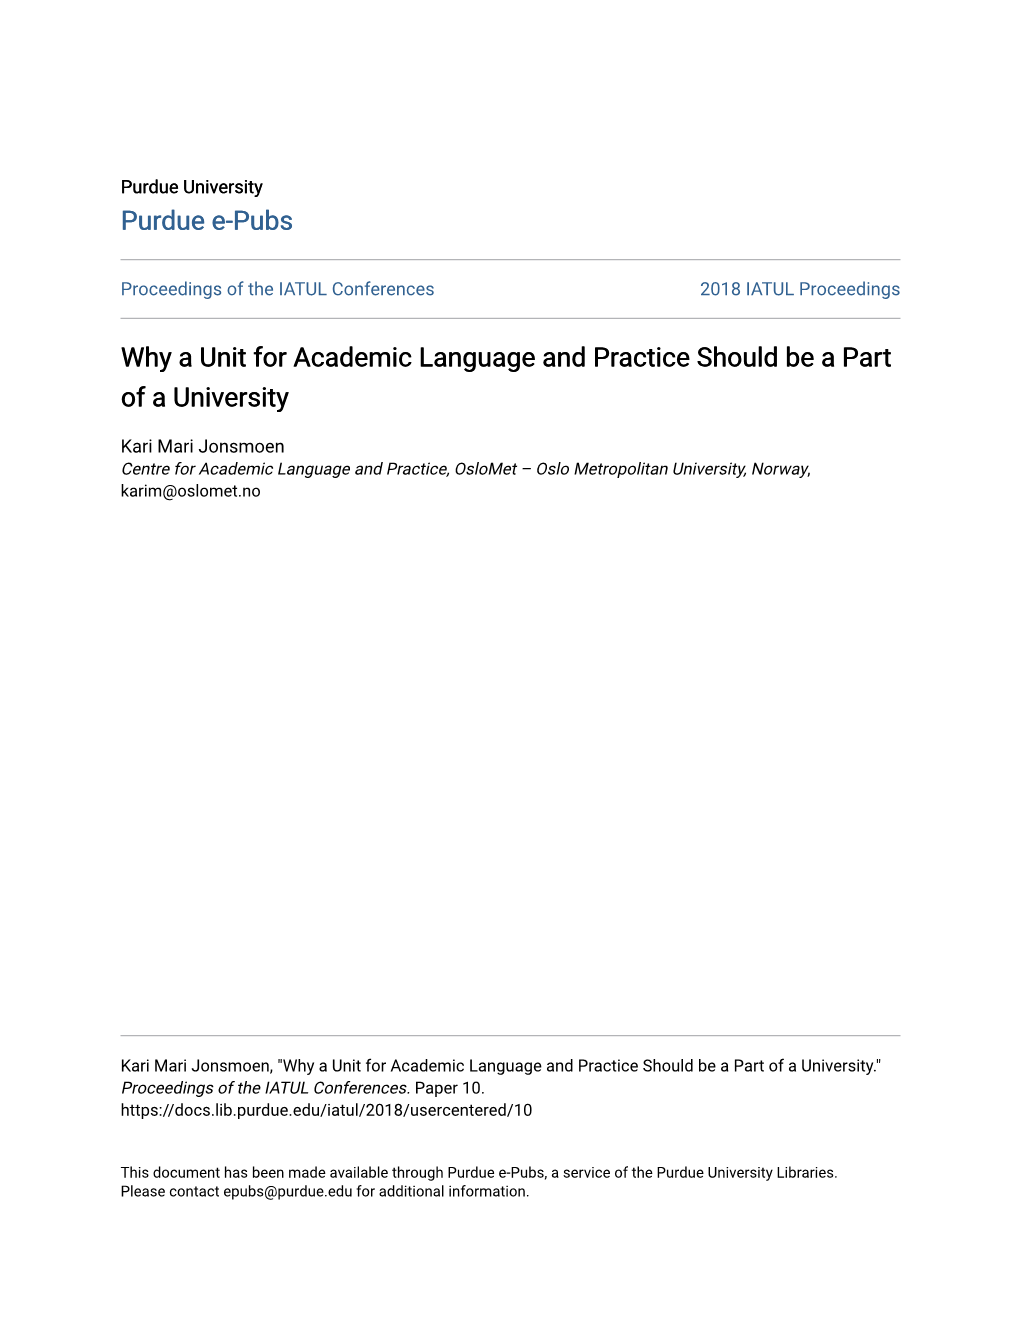 Why a Unit for Academic Language and Practice Should Be a Part of a University